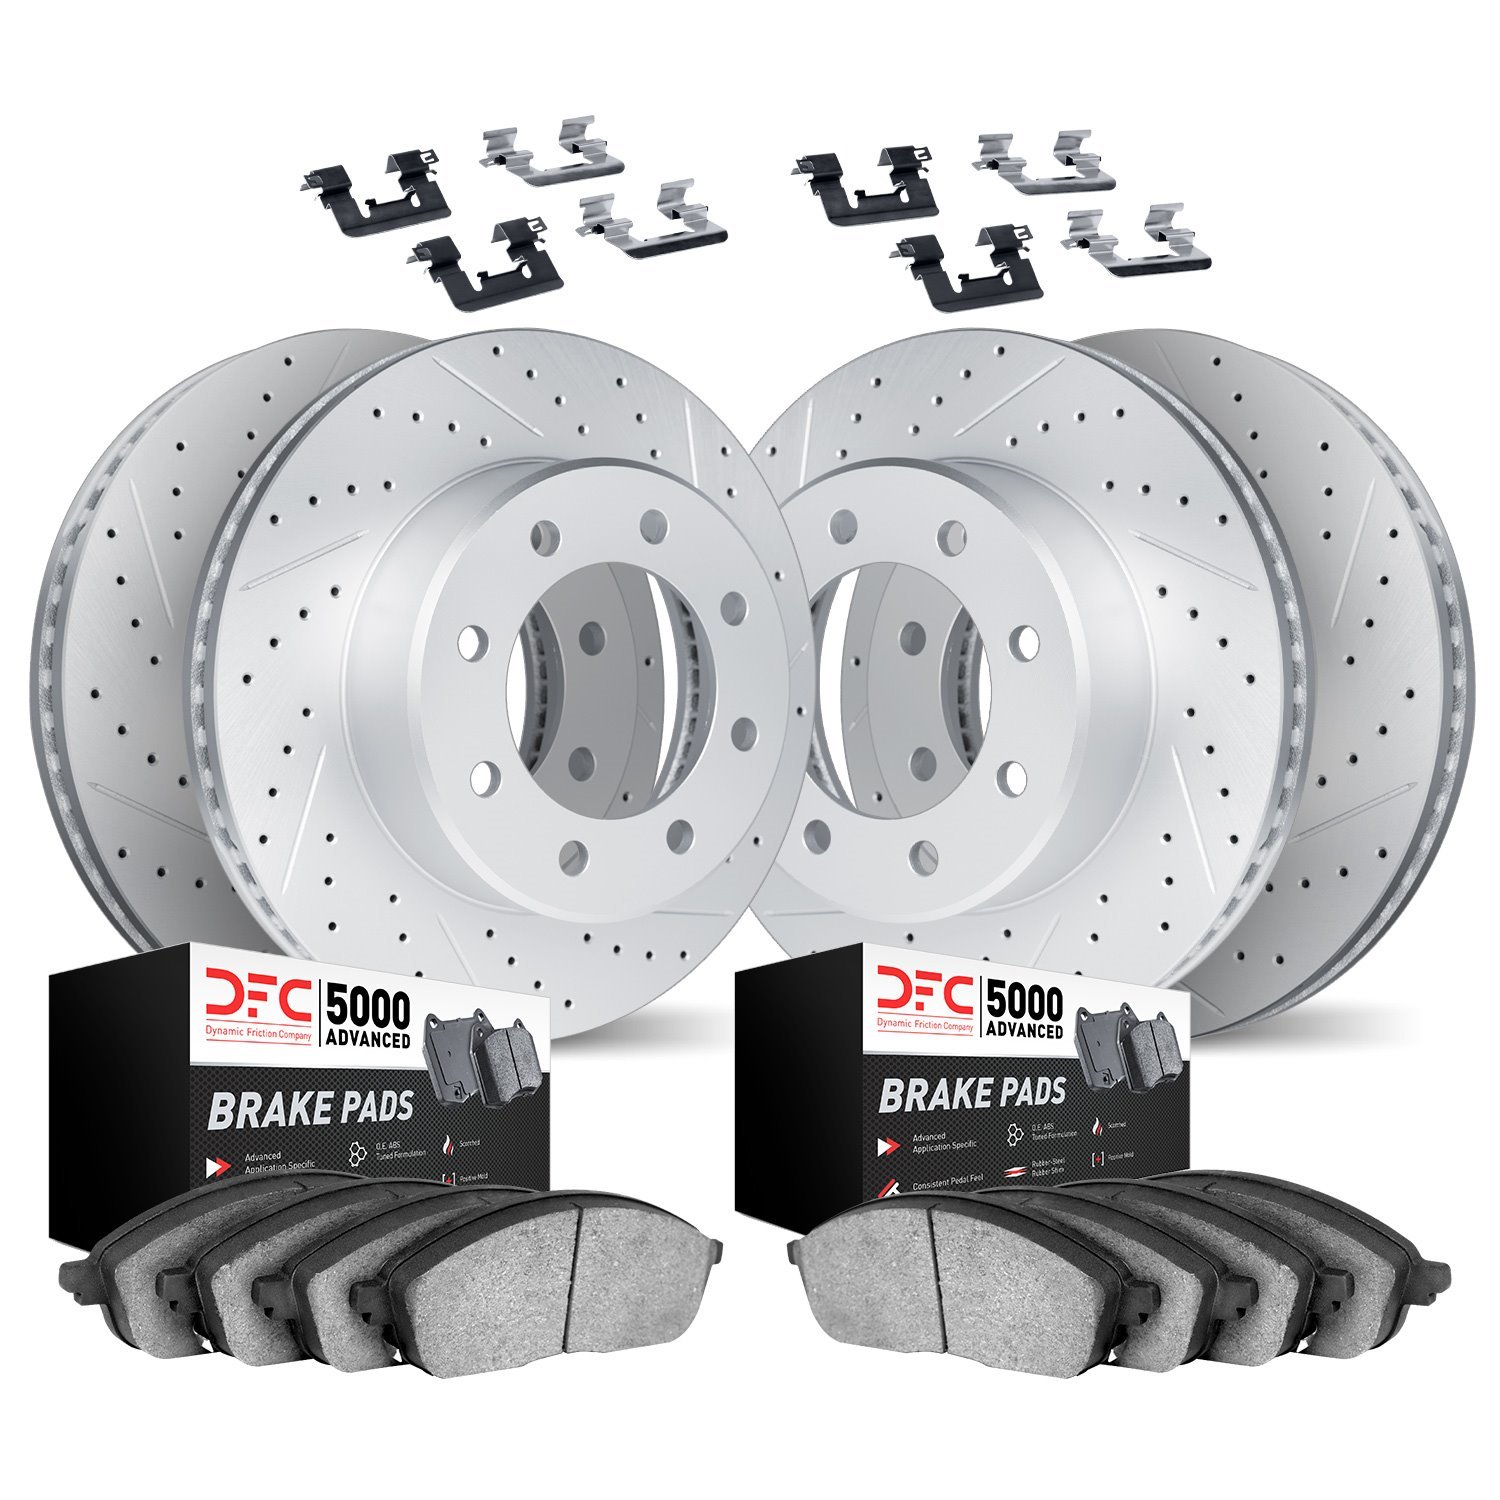 2514-48013 Geoperformance Drilled/Slotted Rotors w/5000 Advanced Brake Pads Kit & Hardware, 1999-2013 GM, Position: Front and Re